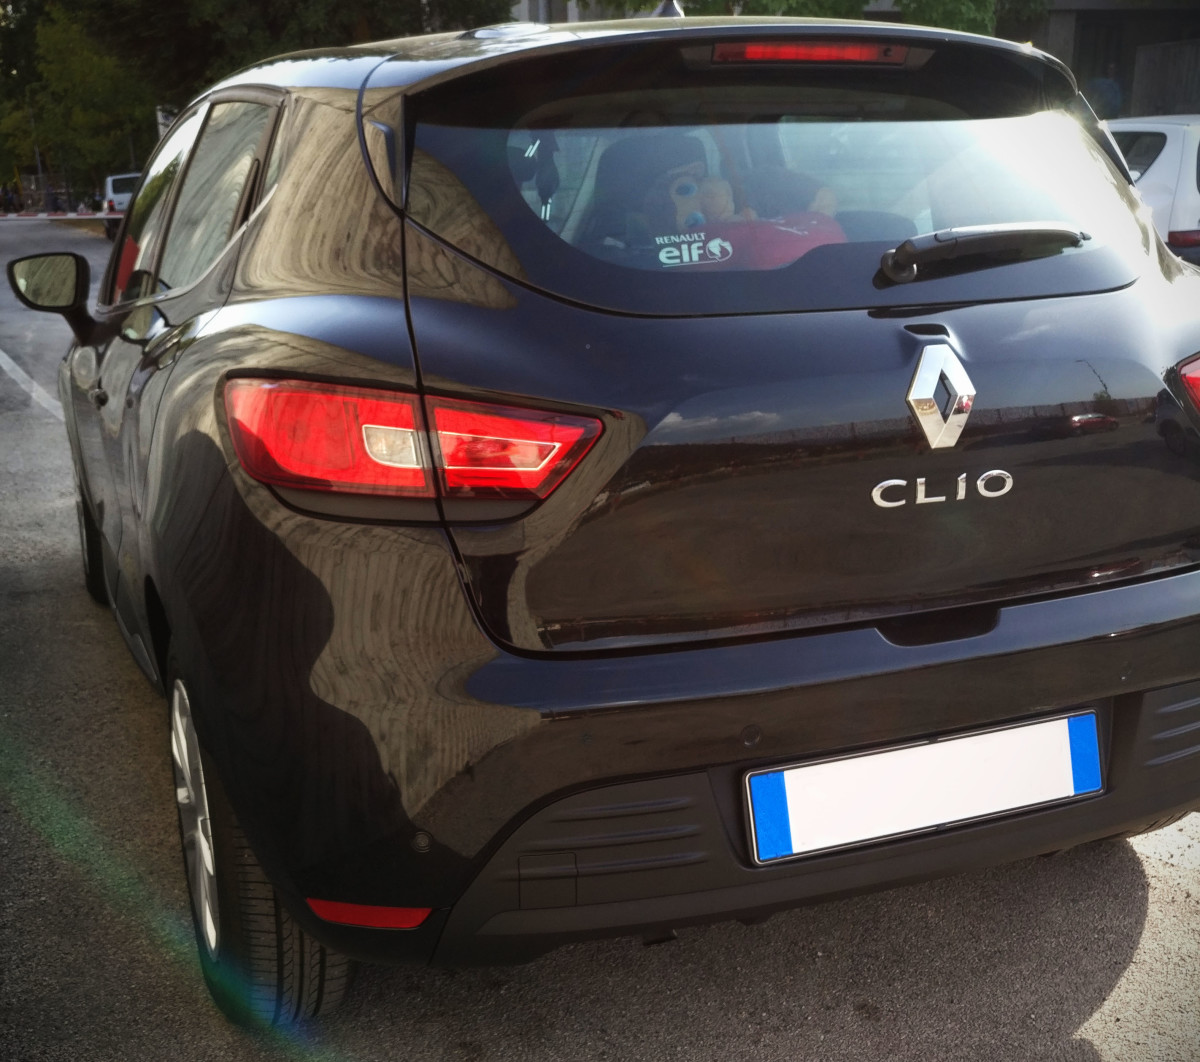 Back view of my Renault Clio. Notice the parking sensors on the rear bumper.